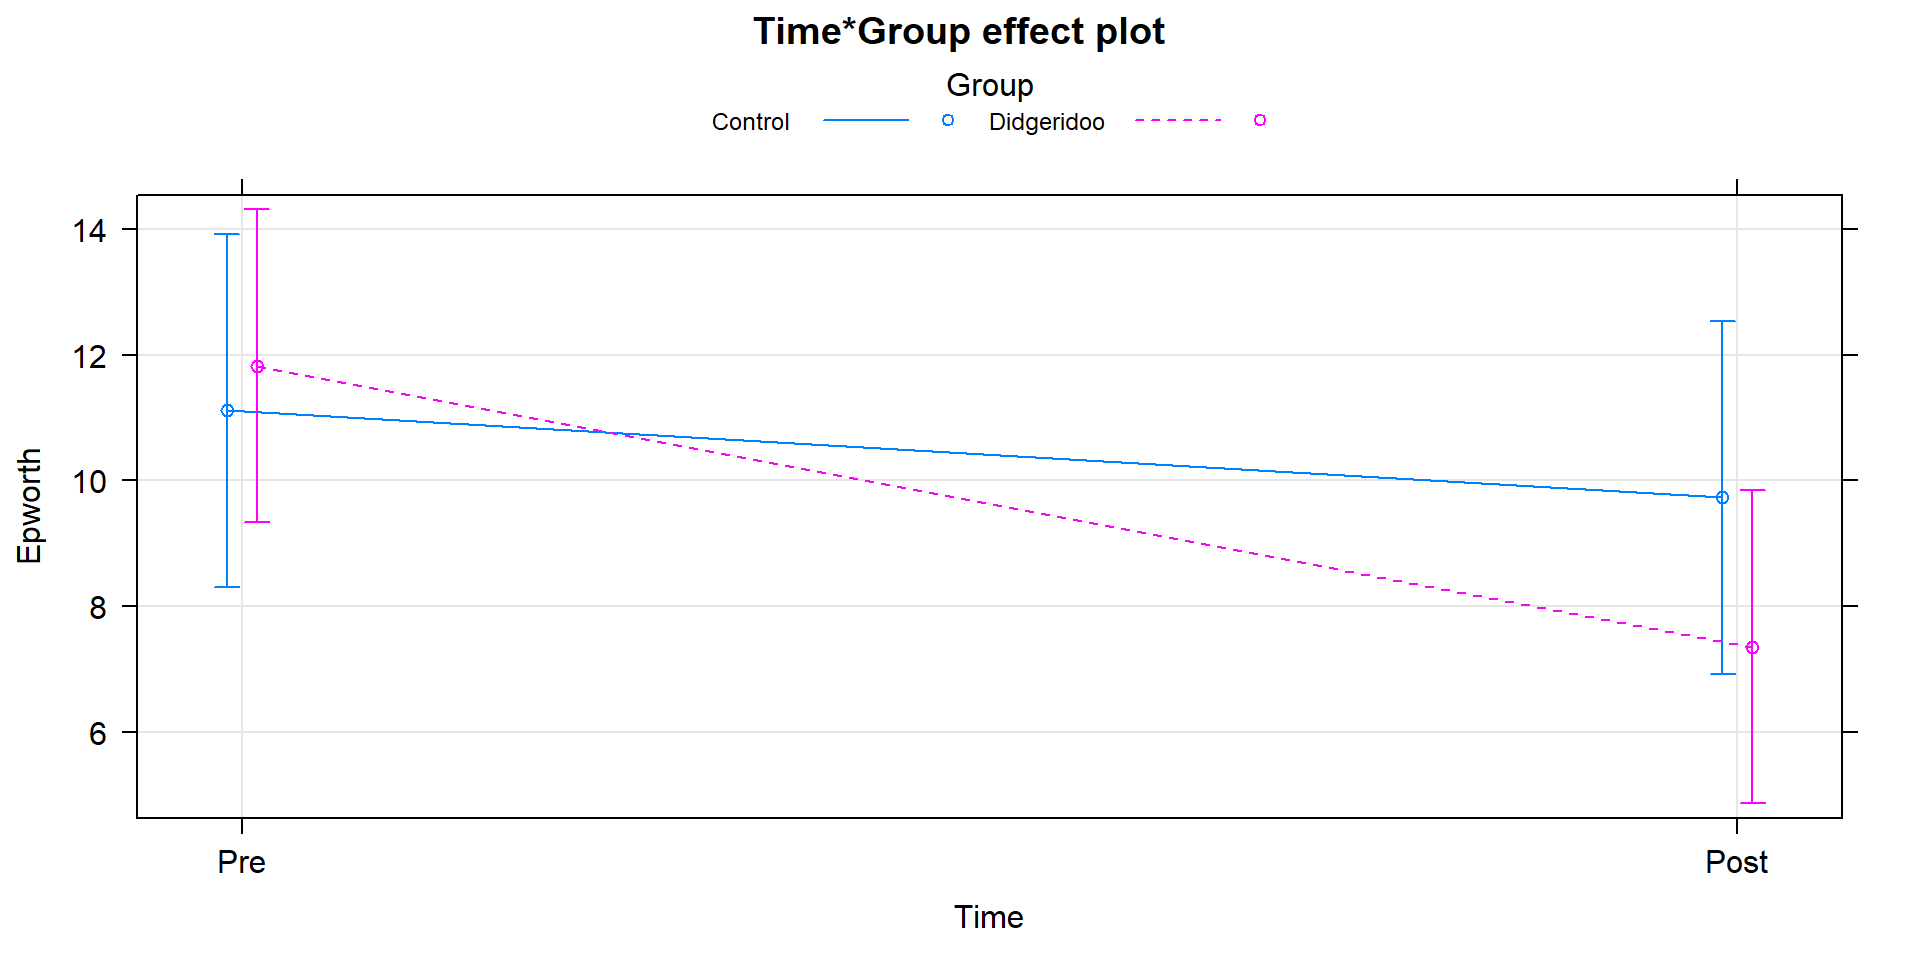 Term-plot of Time by Group interaction, results are from model that accounts for subject-to-subject variation in a mixed model.